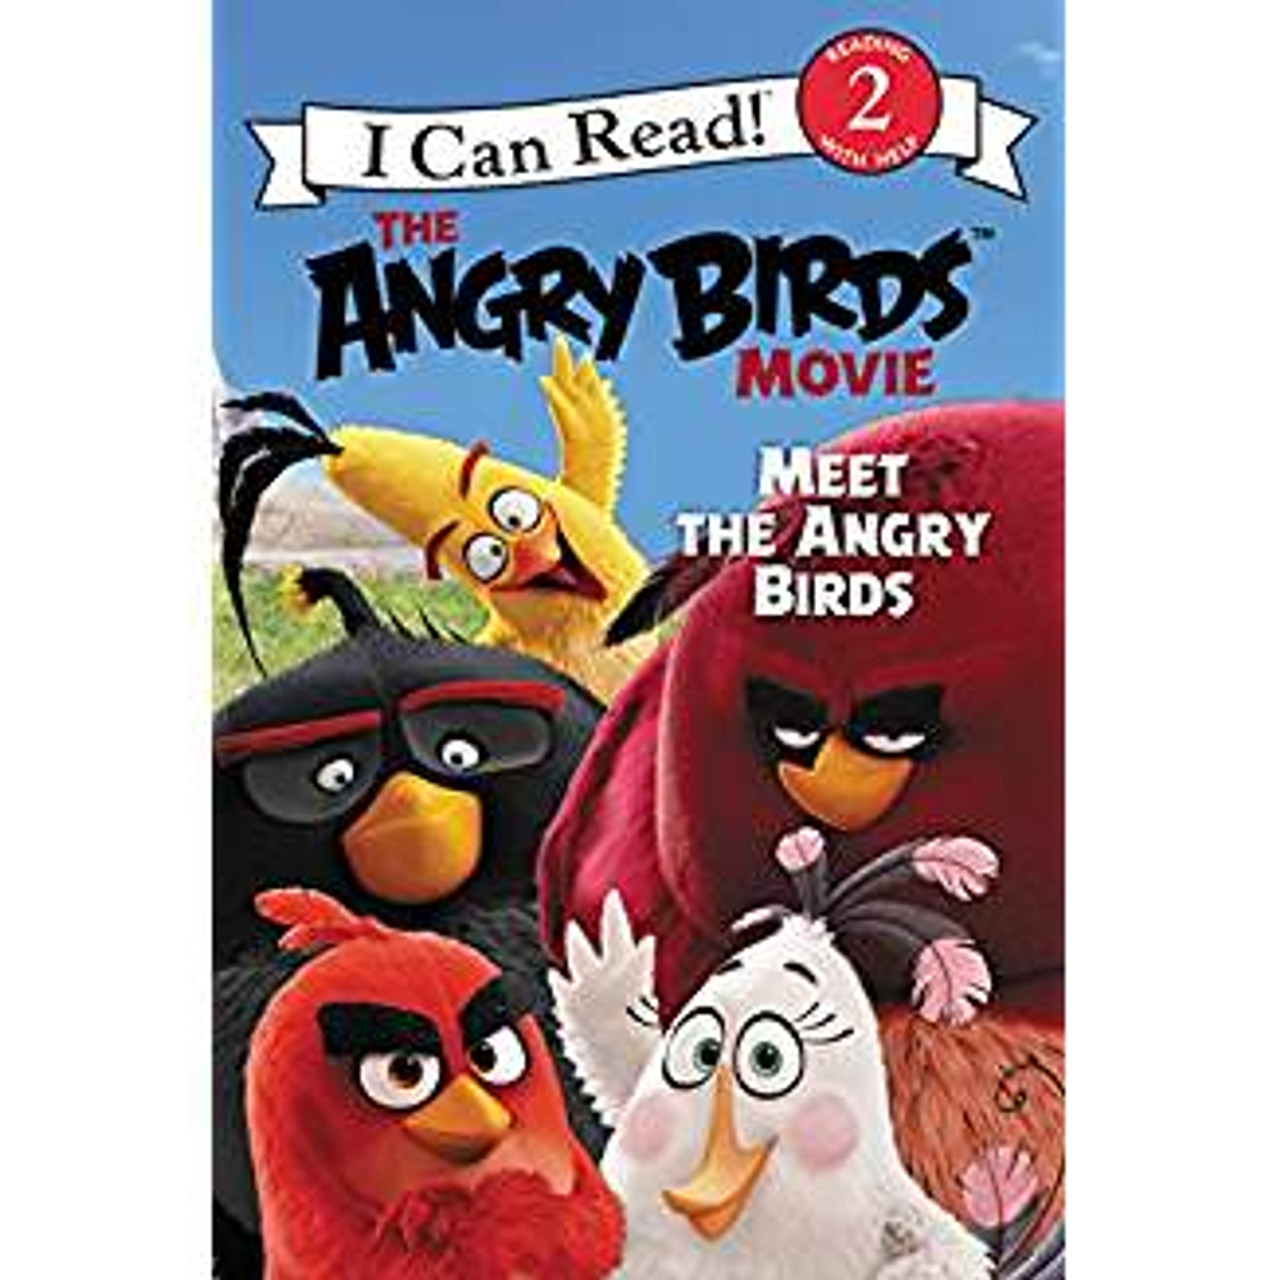 Red, Chuck, Bomb, and Terrence are Angry Birds who don t quite fit in with the other cheerful birds on Bird Island. When they meet in an anger-management class, things are bound to get out of hand!